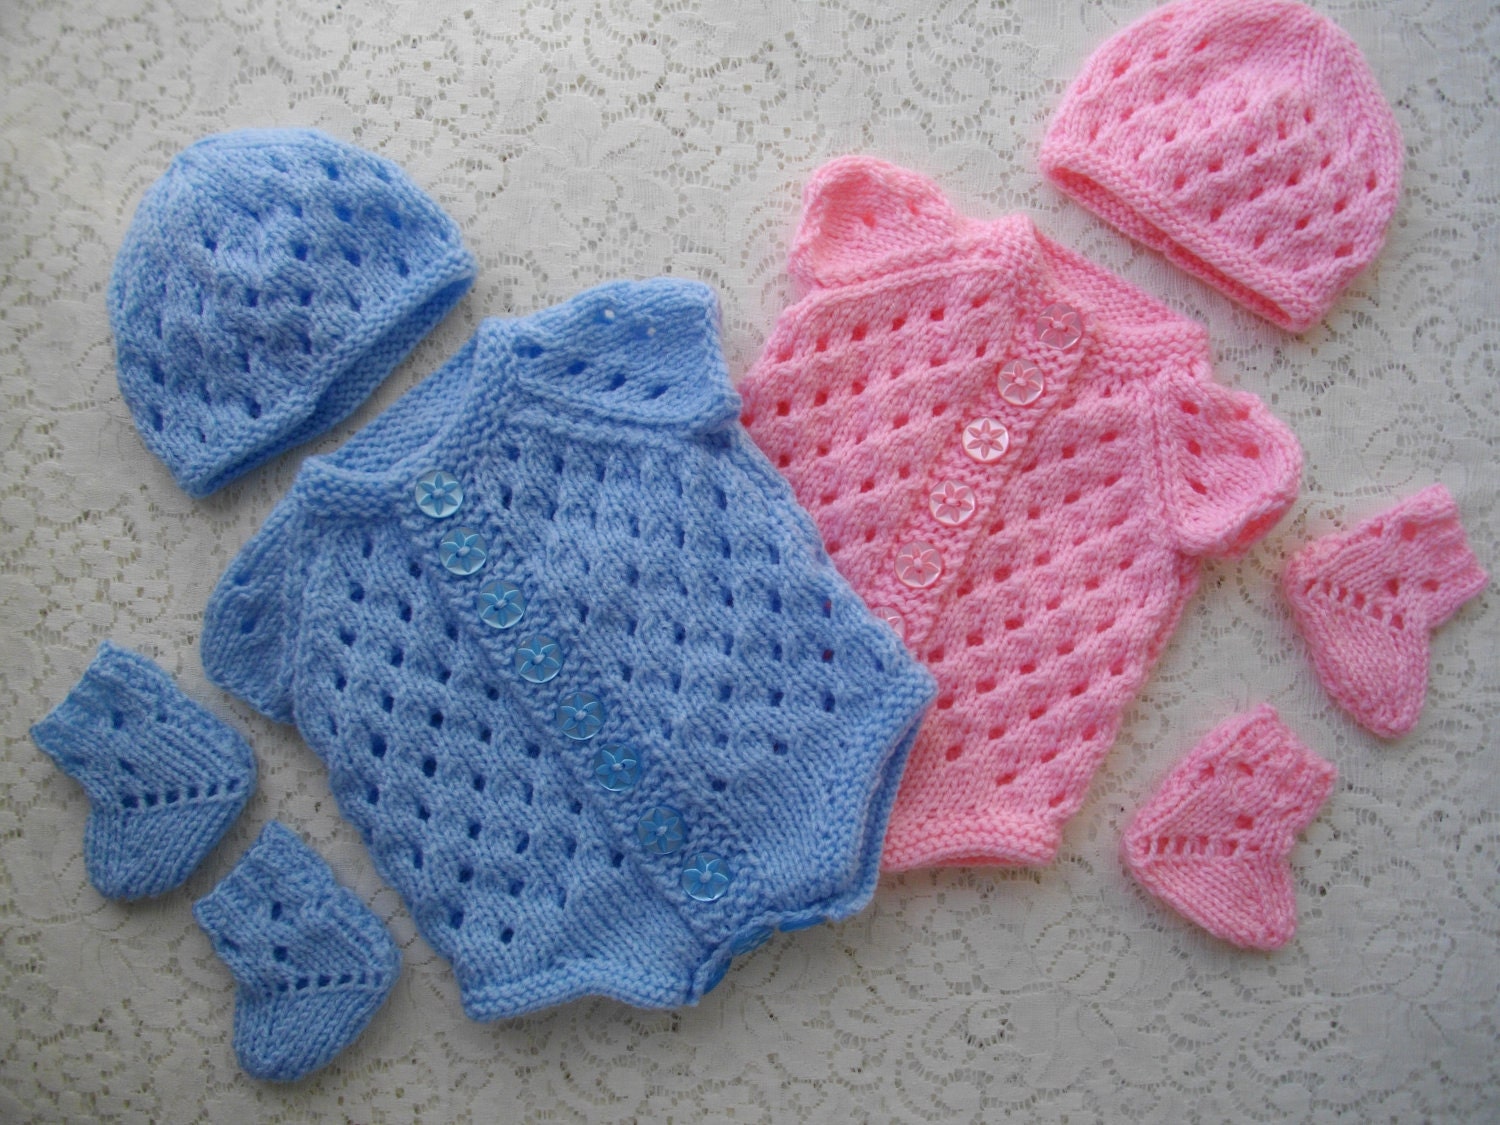 Knitting PATTERN No. 10 Premature Baby or 16 inch by